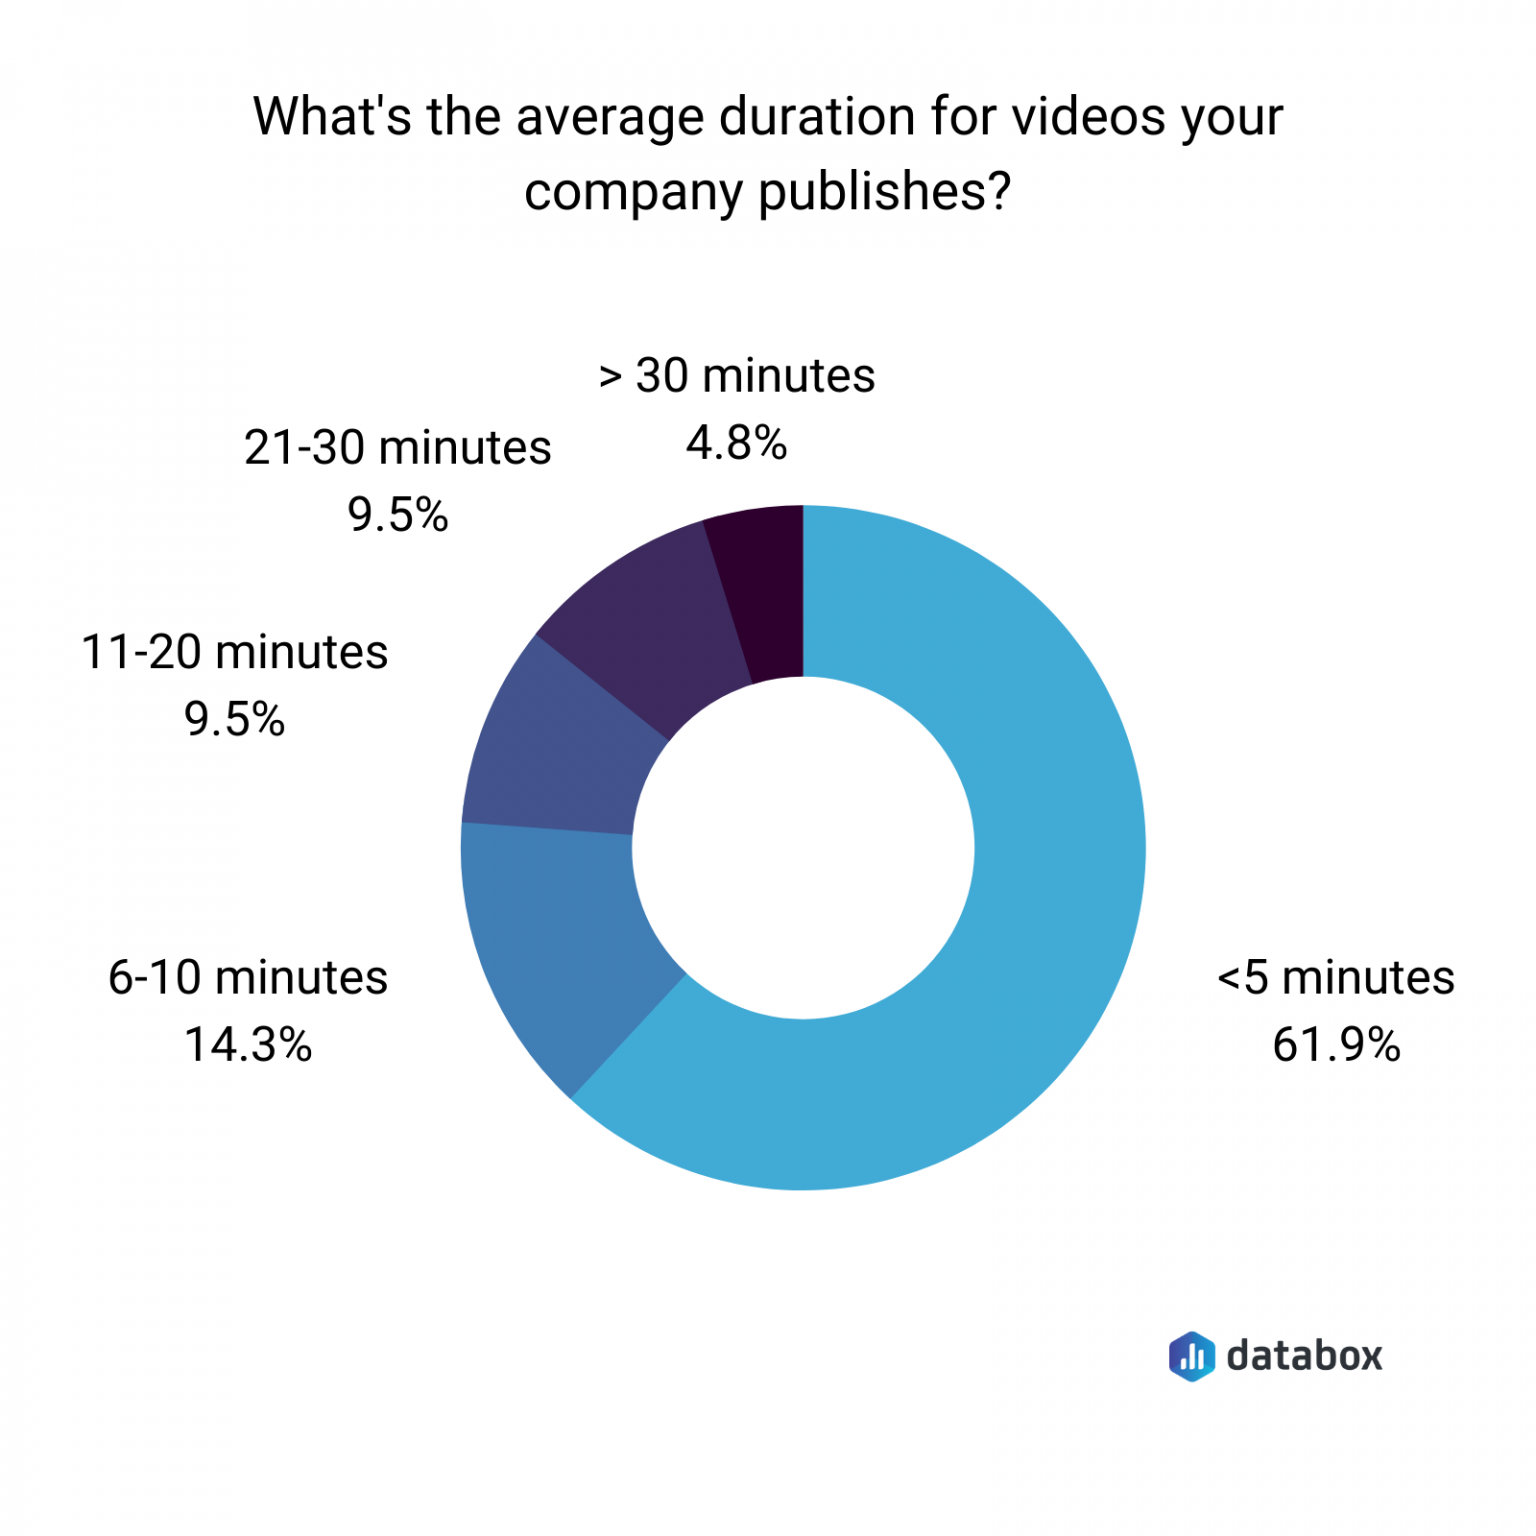 donut chart showing percentages of video length